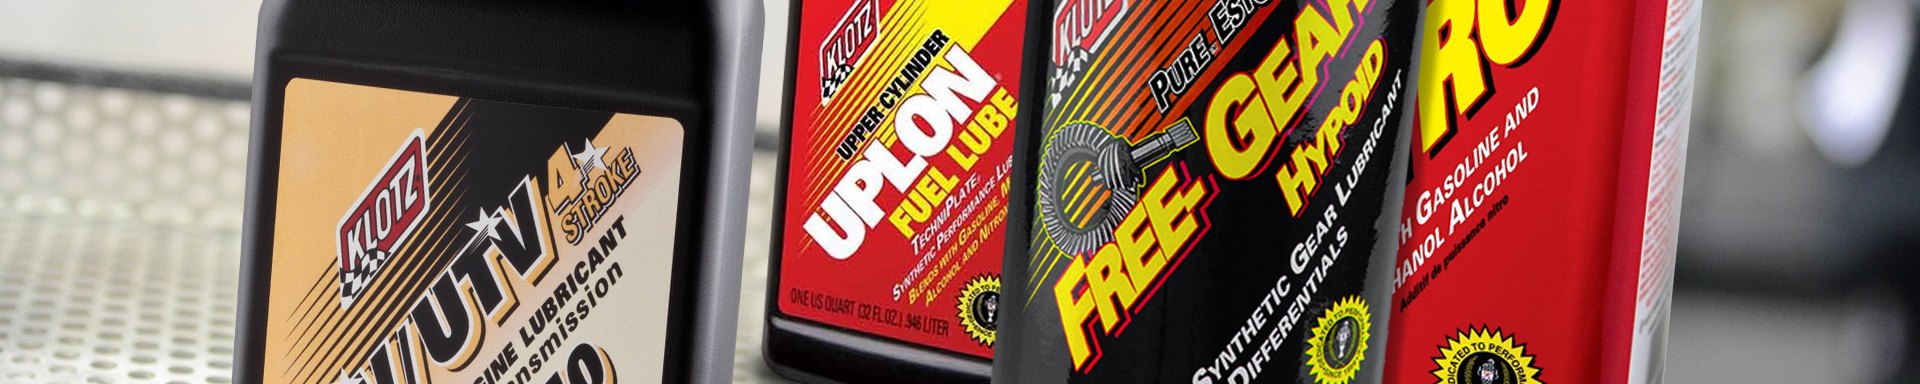 KLOTZ Big Twin Primary Chain Case Lubricant KH-C80 Oil Chemicals 